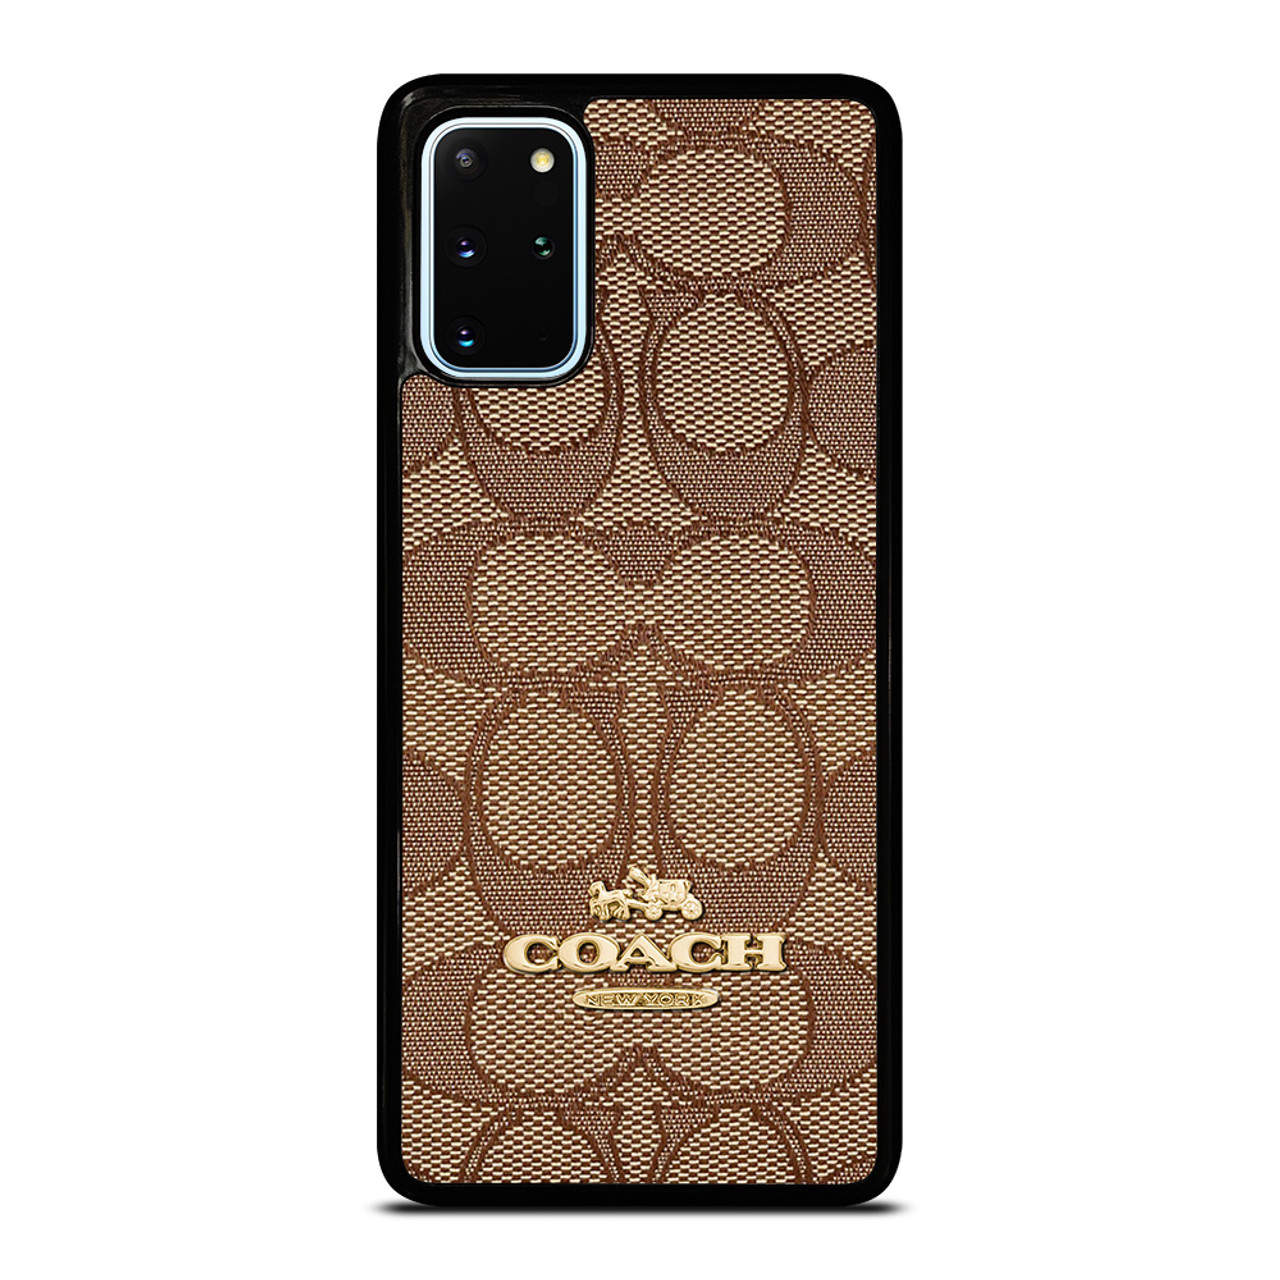 Monogram Style Cellphone Back Cover Case for iPhone Samsung